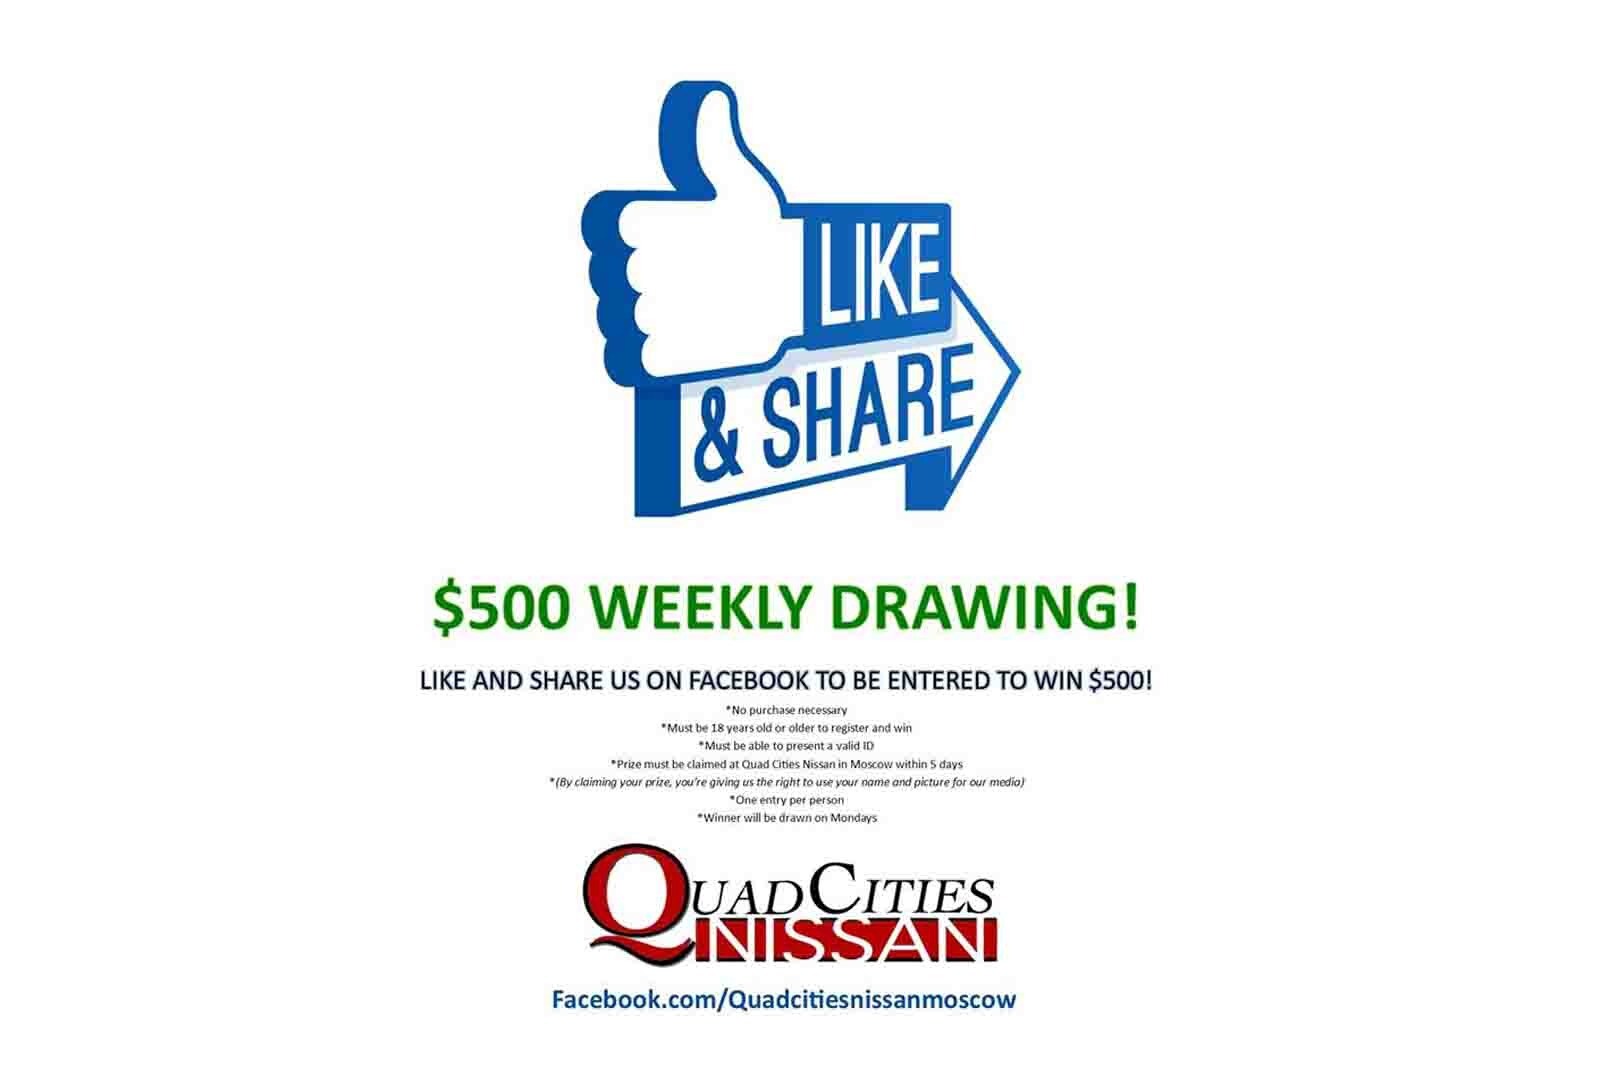 Quad Cities Nissan Offers $500 Weekly Prize to Grow Community Awareness